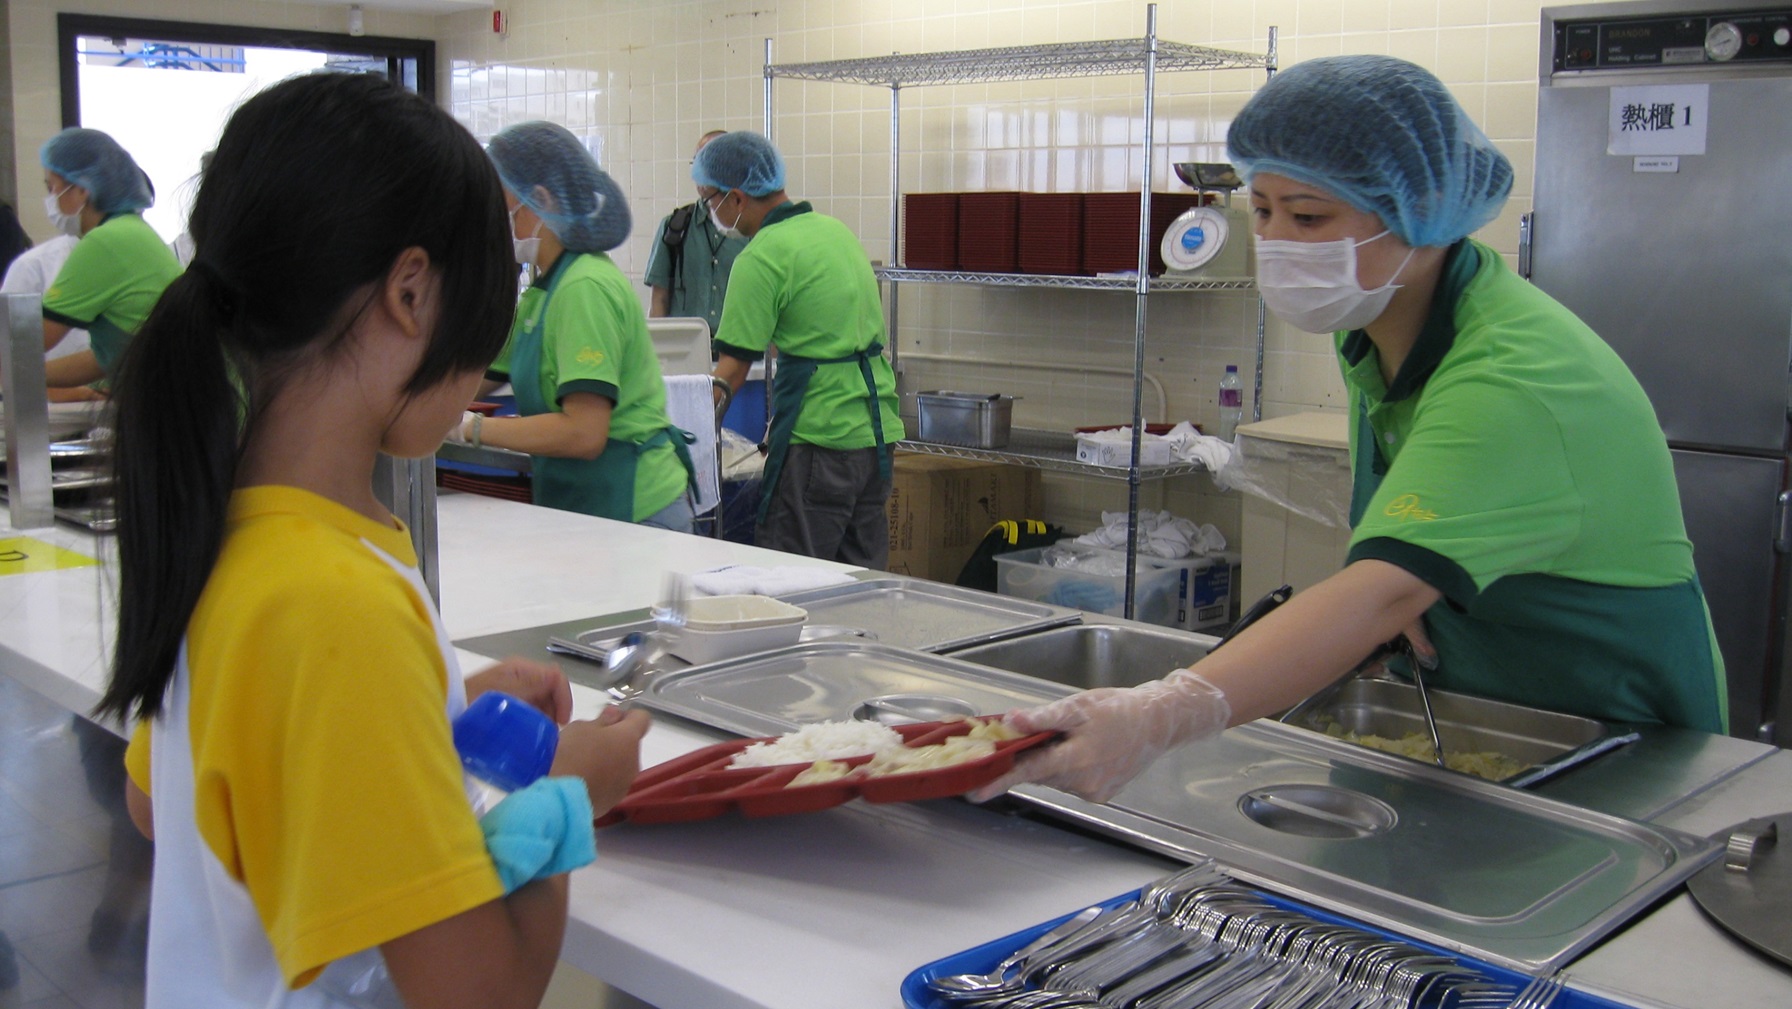 On-site meal portioning according to students' individual needs